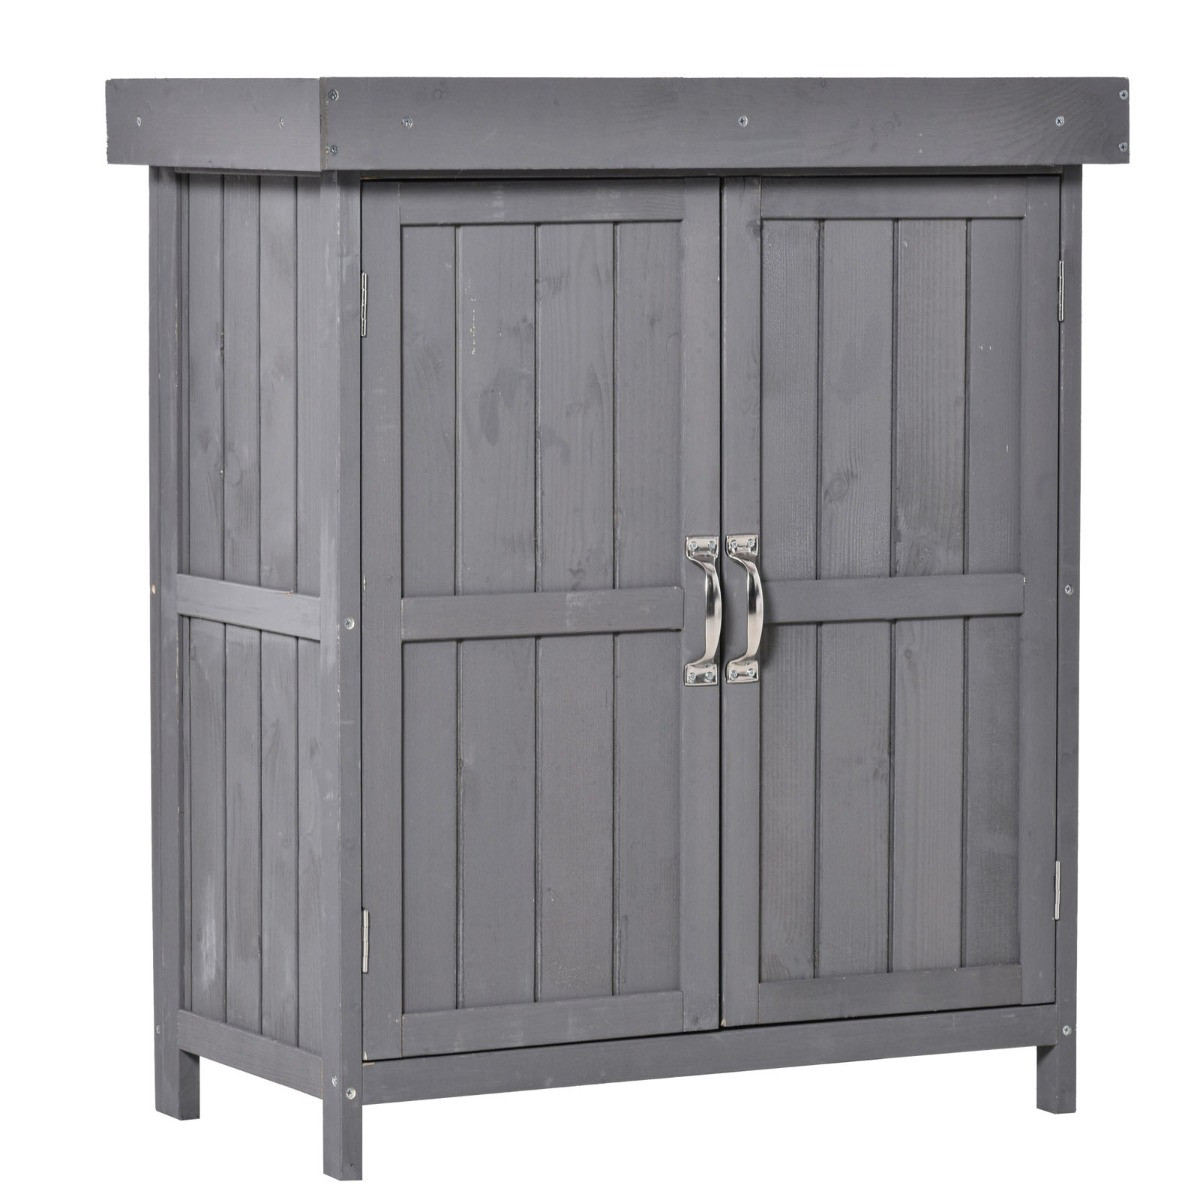 Outsunny Wooden Garden Storage Shed Cabinet - Grey>